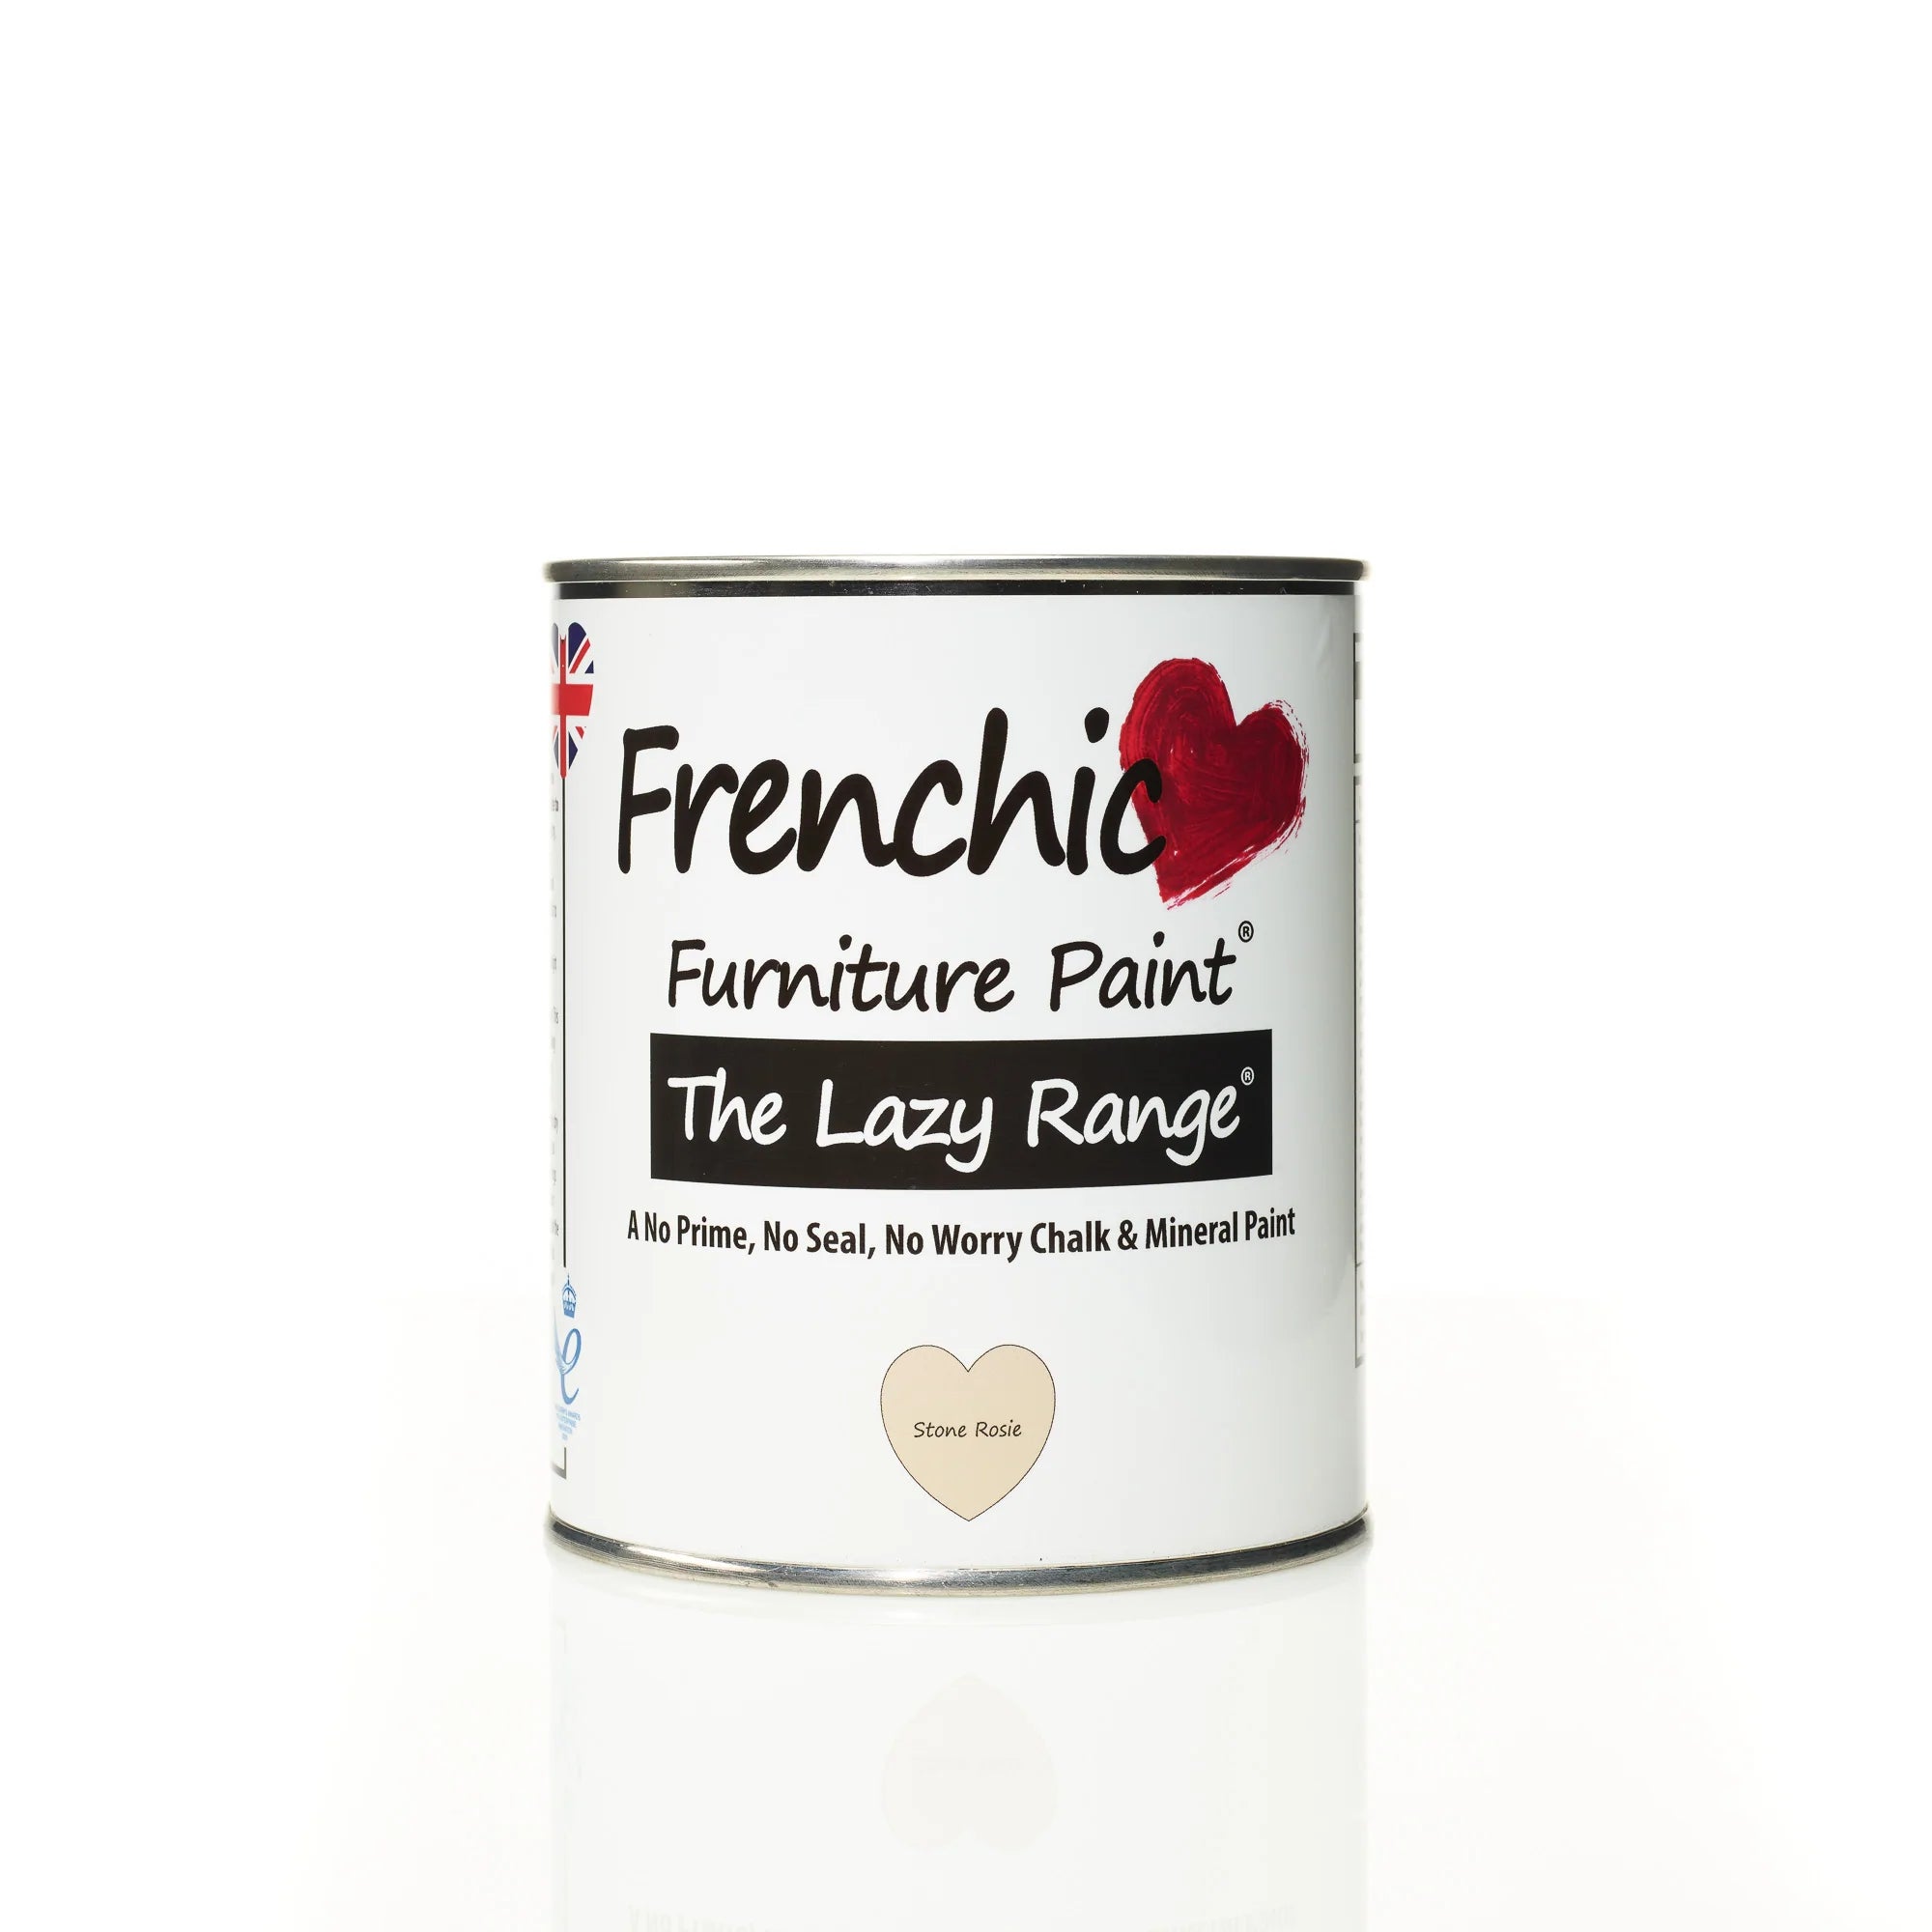 Frenchic Paint | Lazy Range - Stone Rosie by Weirs of Baggot St